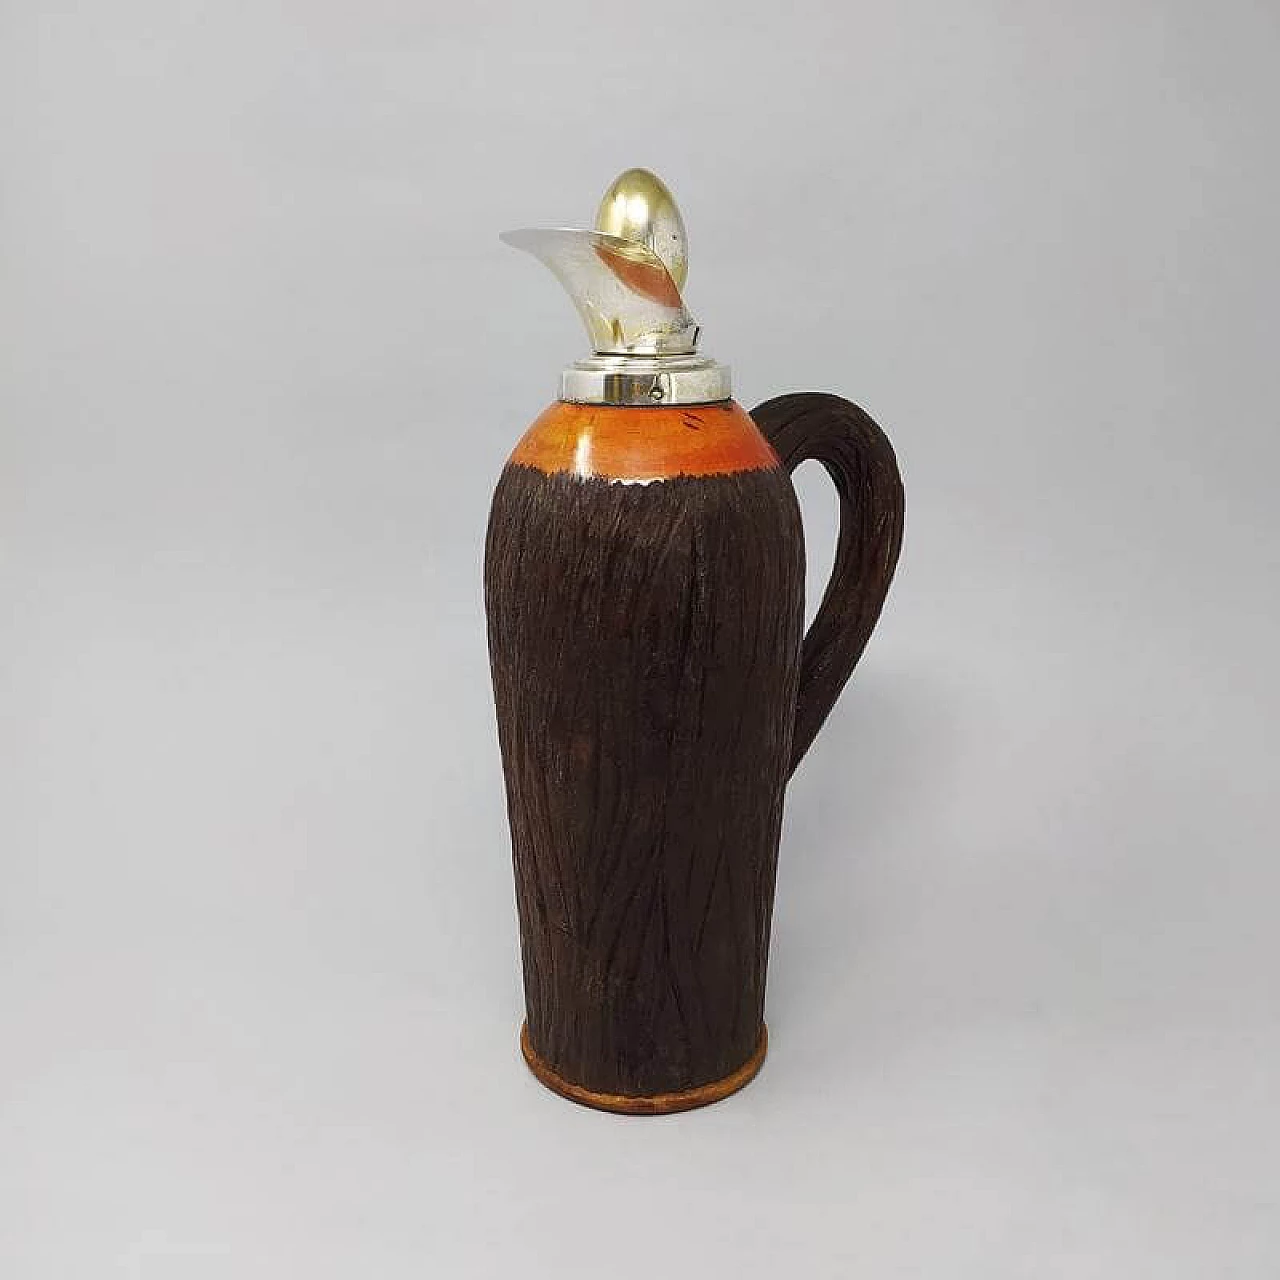 1950s Stunning Aldo Tura Pitcher in Brass and Wood, Made in Italy 1183877